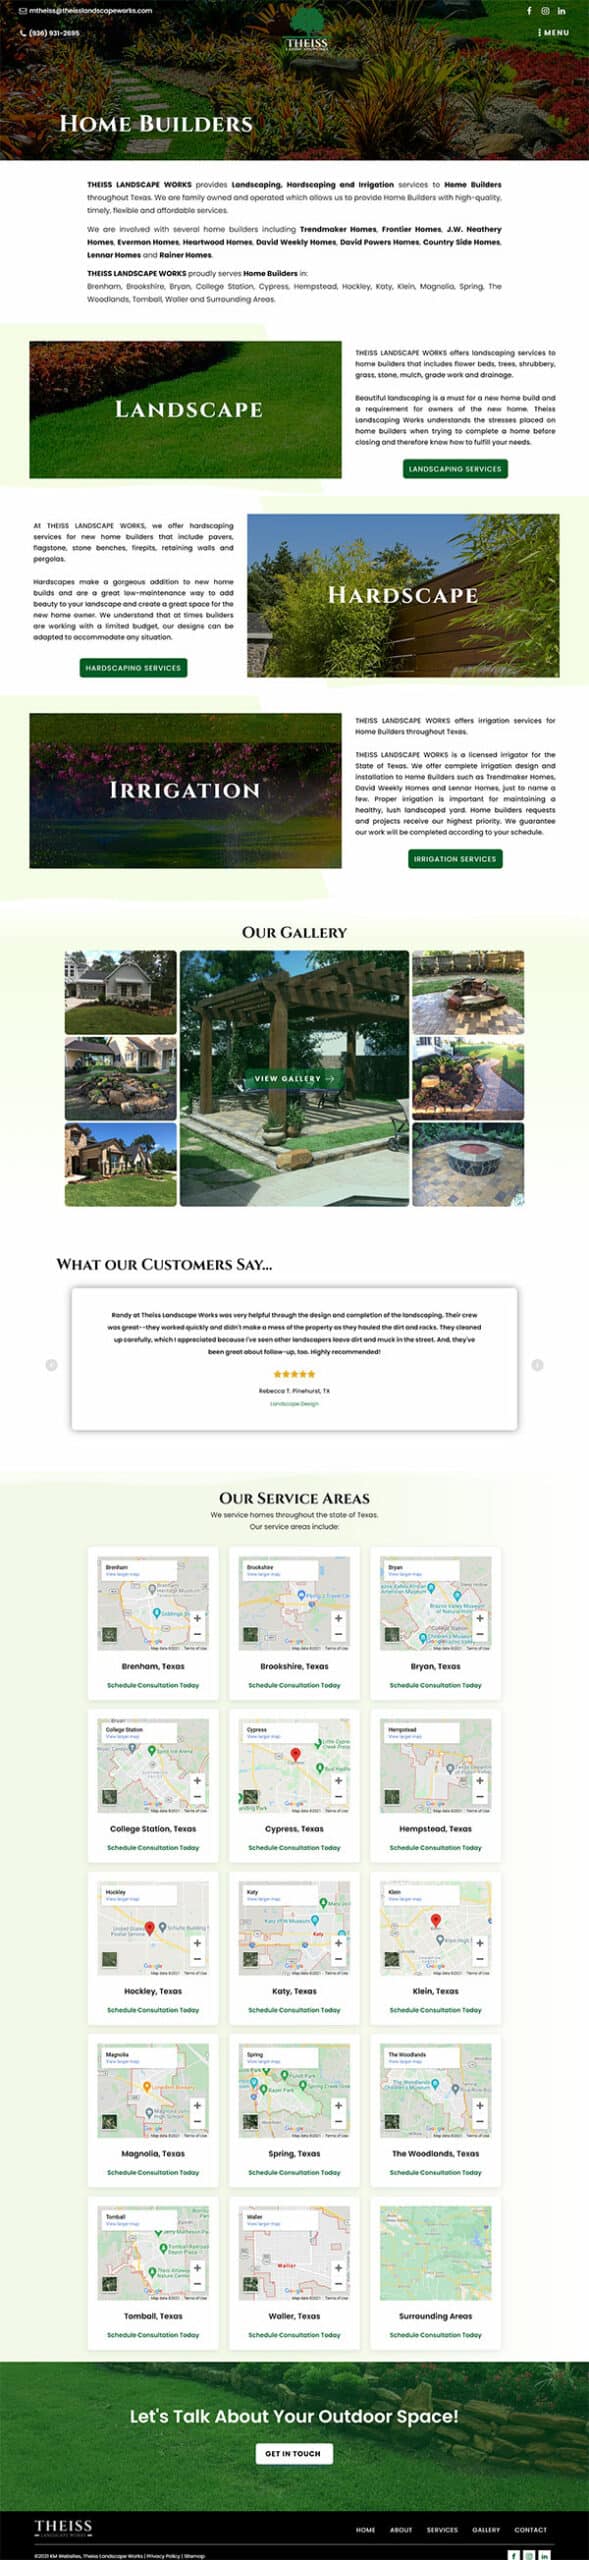 Theiss Landscape Works Home Builder Services Page